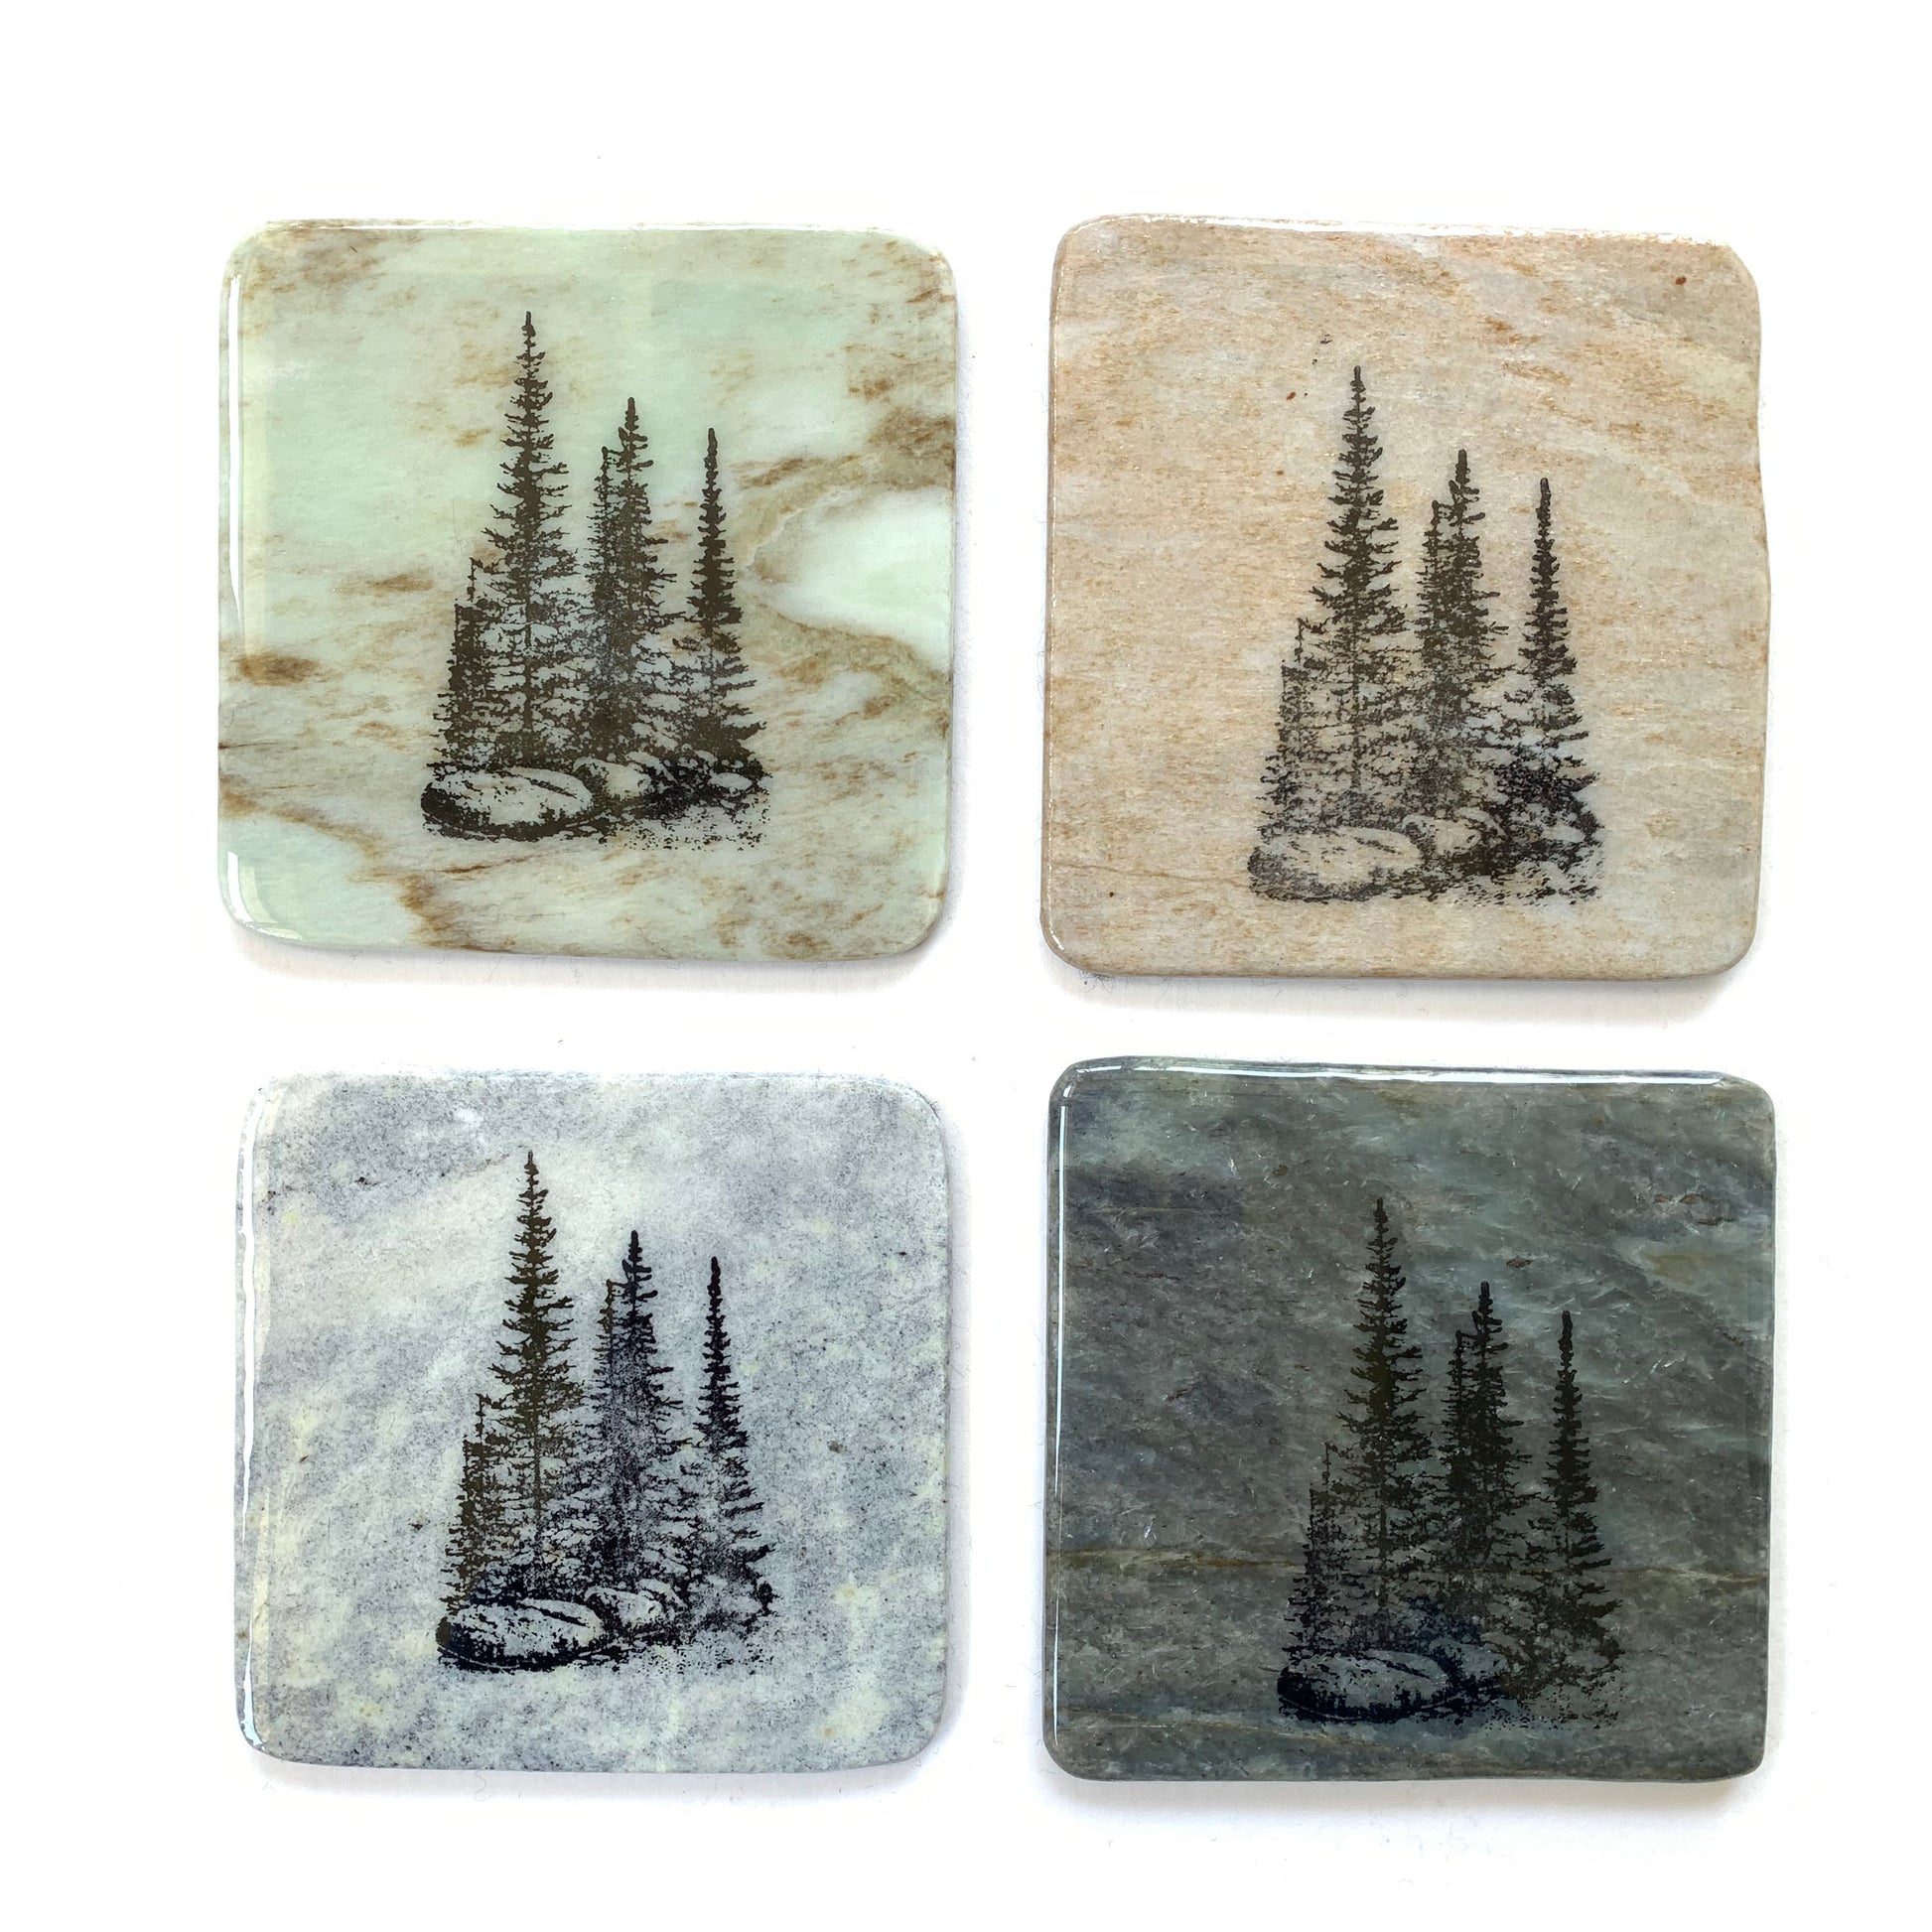 Various granite coasters with three pines design made in Canada.